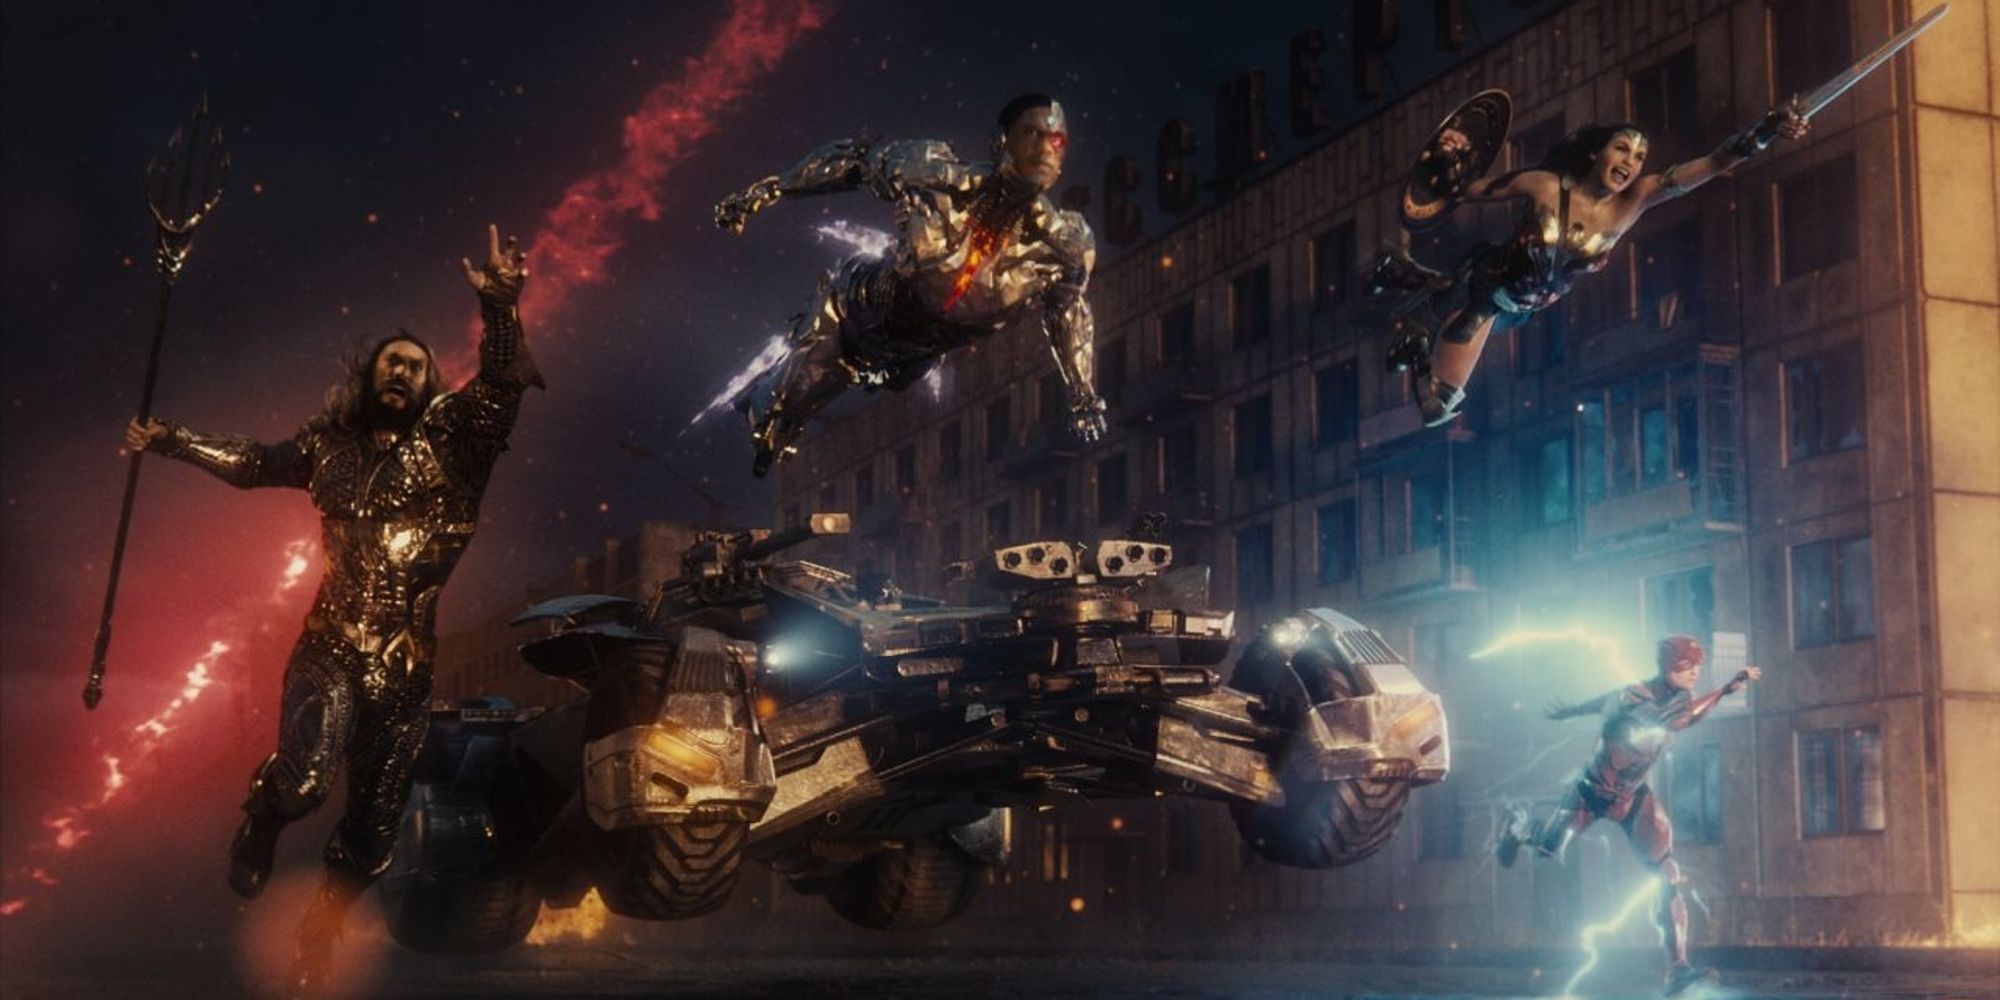 Group shot of the Justice League leaping into action in Zack Snyder's Justice League